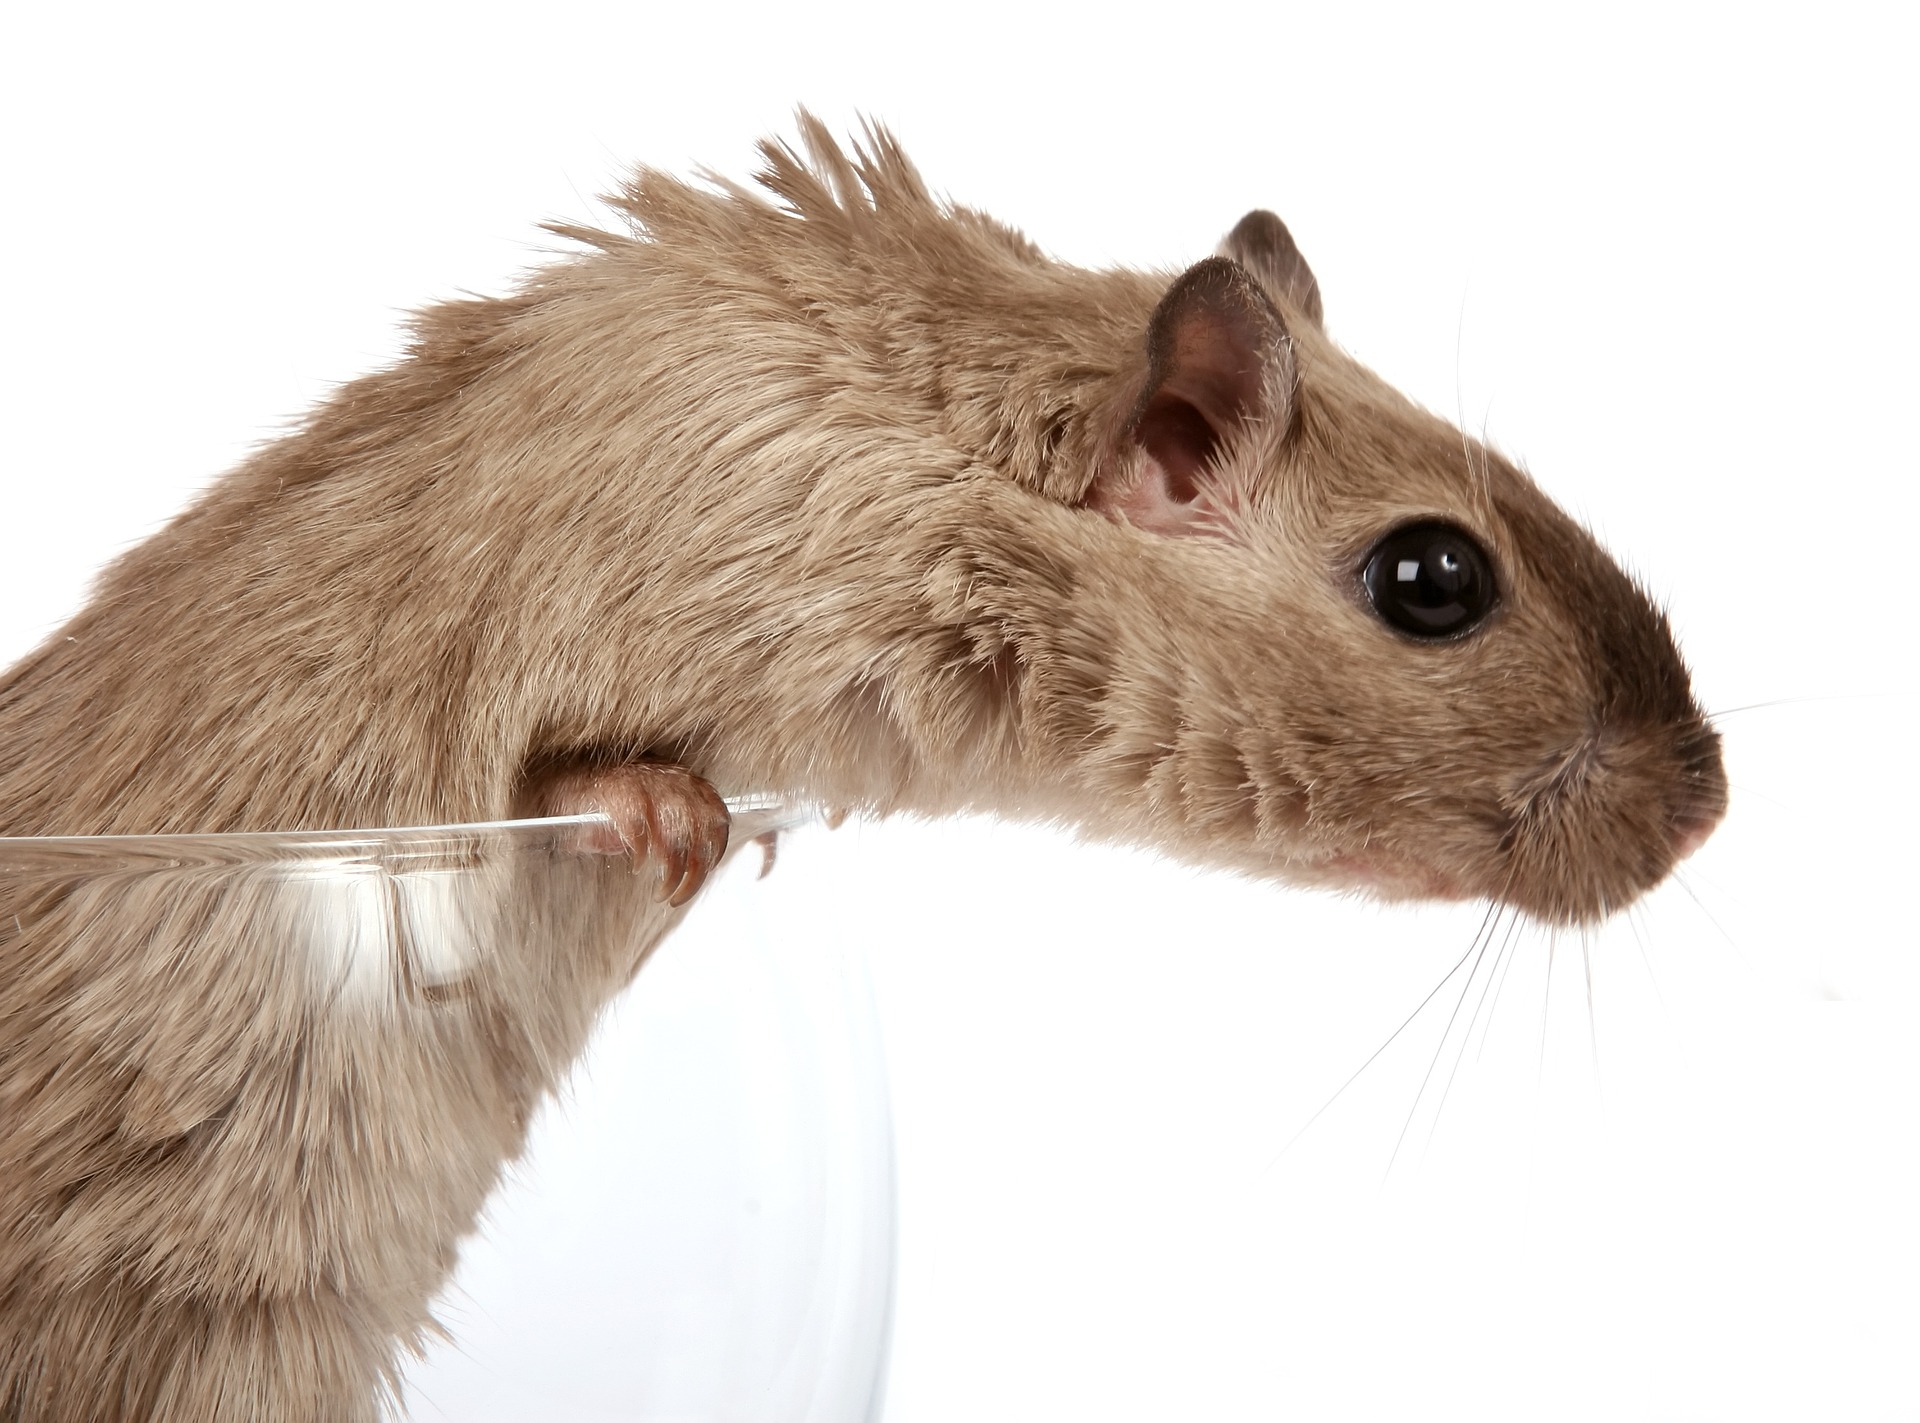 Victory for Mice! The University of Adelaide Ends Forced Swim Test on Animals